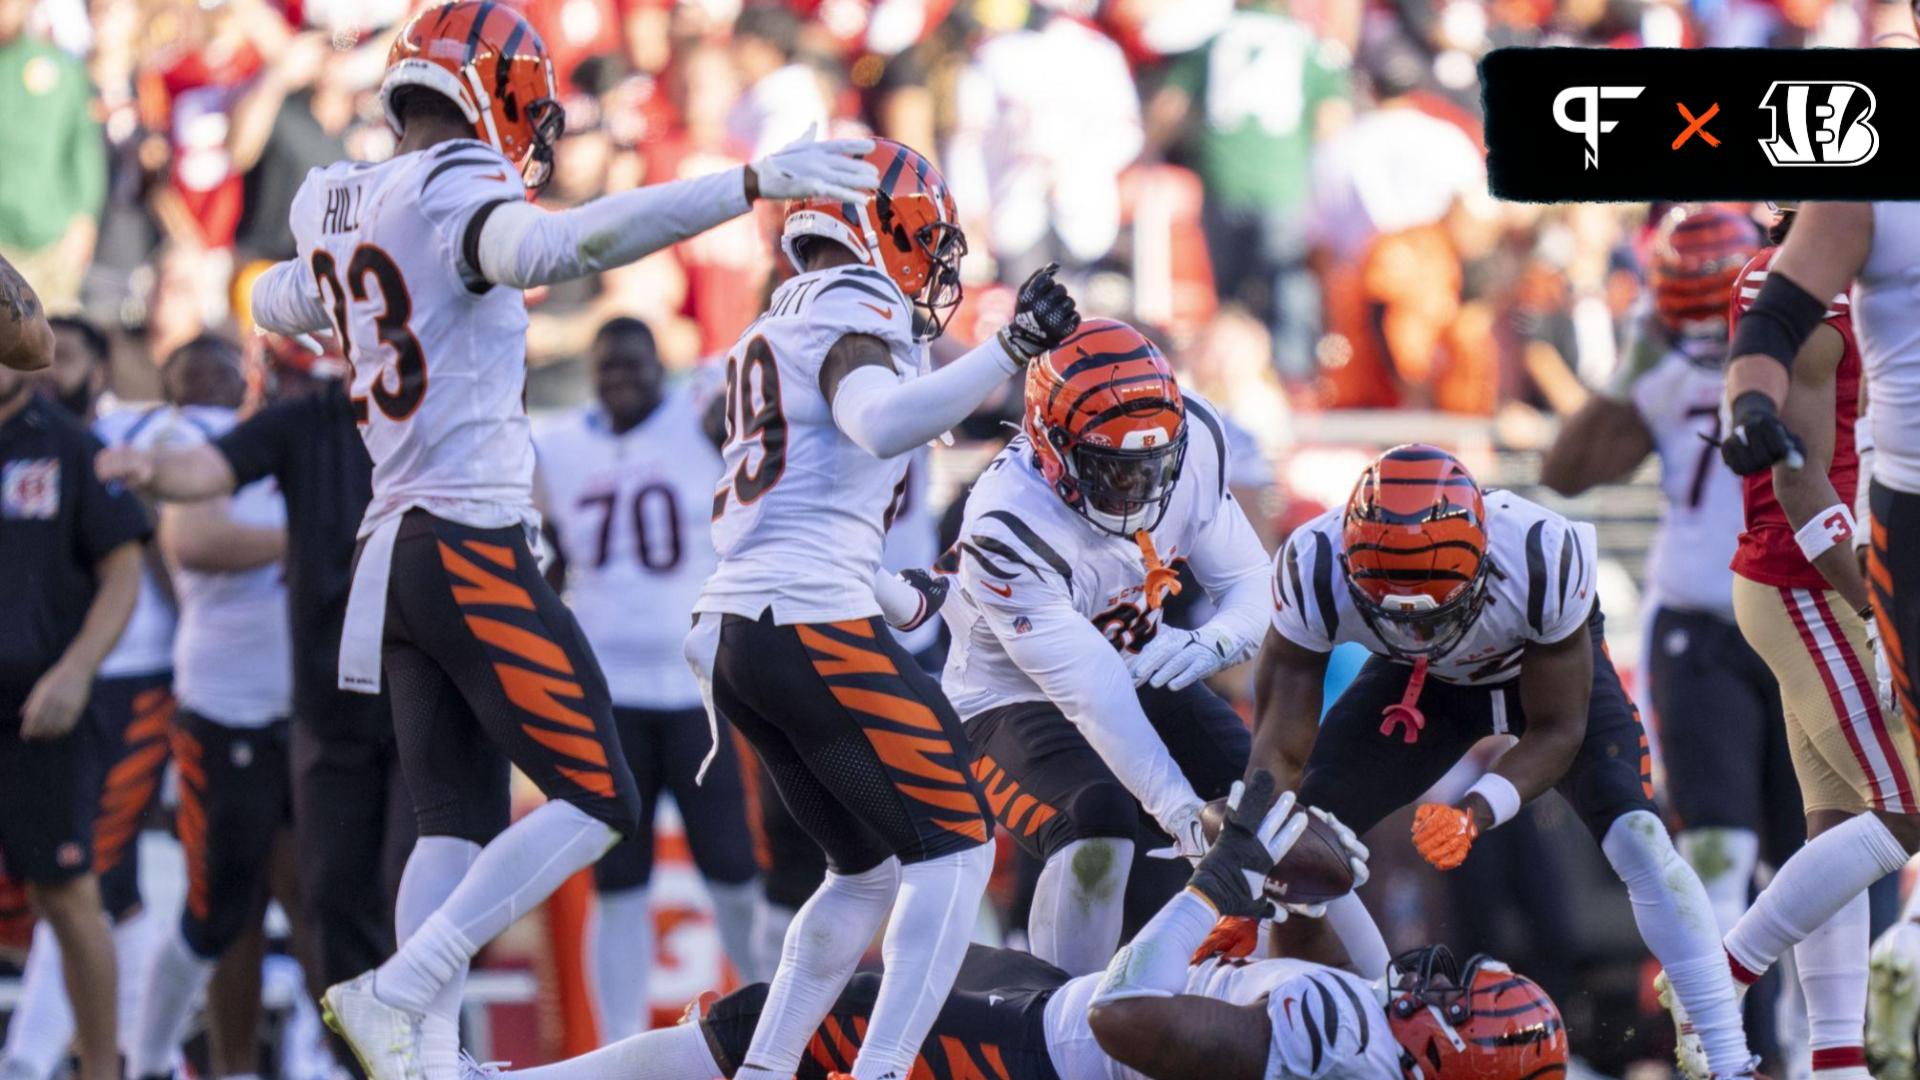 Cincinnati Bengals defensive tackle BJ Hill (92) celebrates after recovering a fumble by the San Francisco 49ers during the fourth quarter at Levi's Stadium.